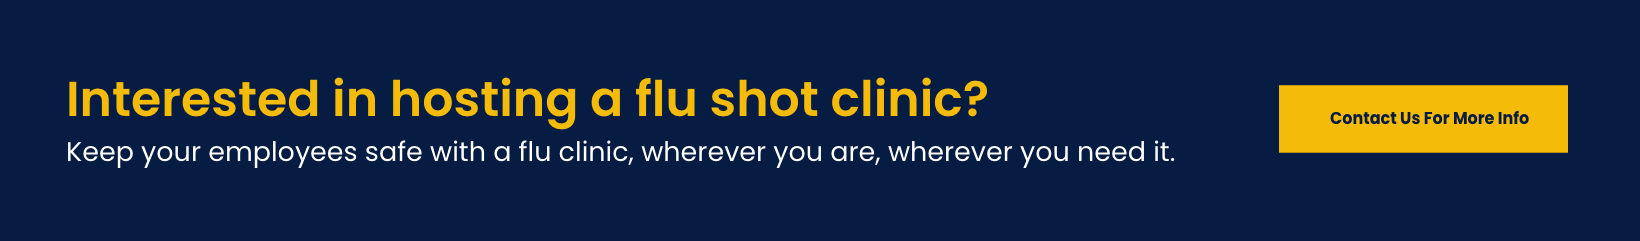 Keep your employees safe by hosting a flu shot clinic in your own office. Contact us for more information